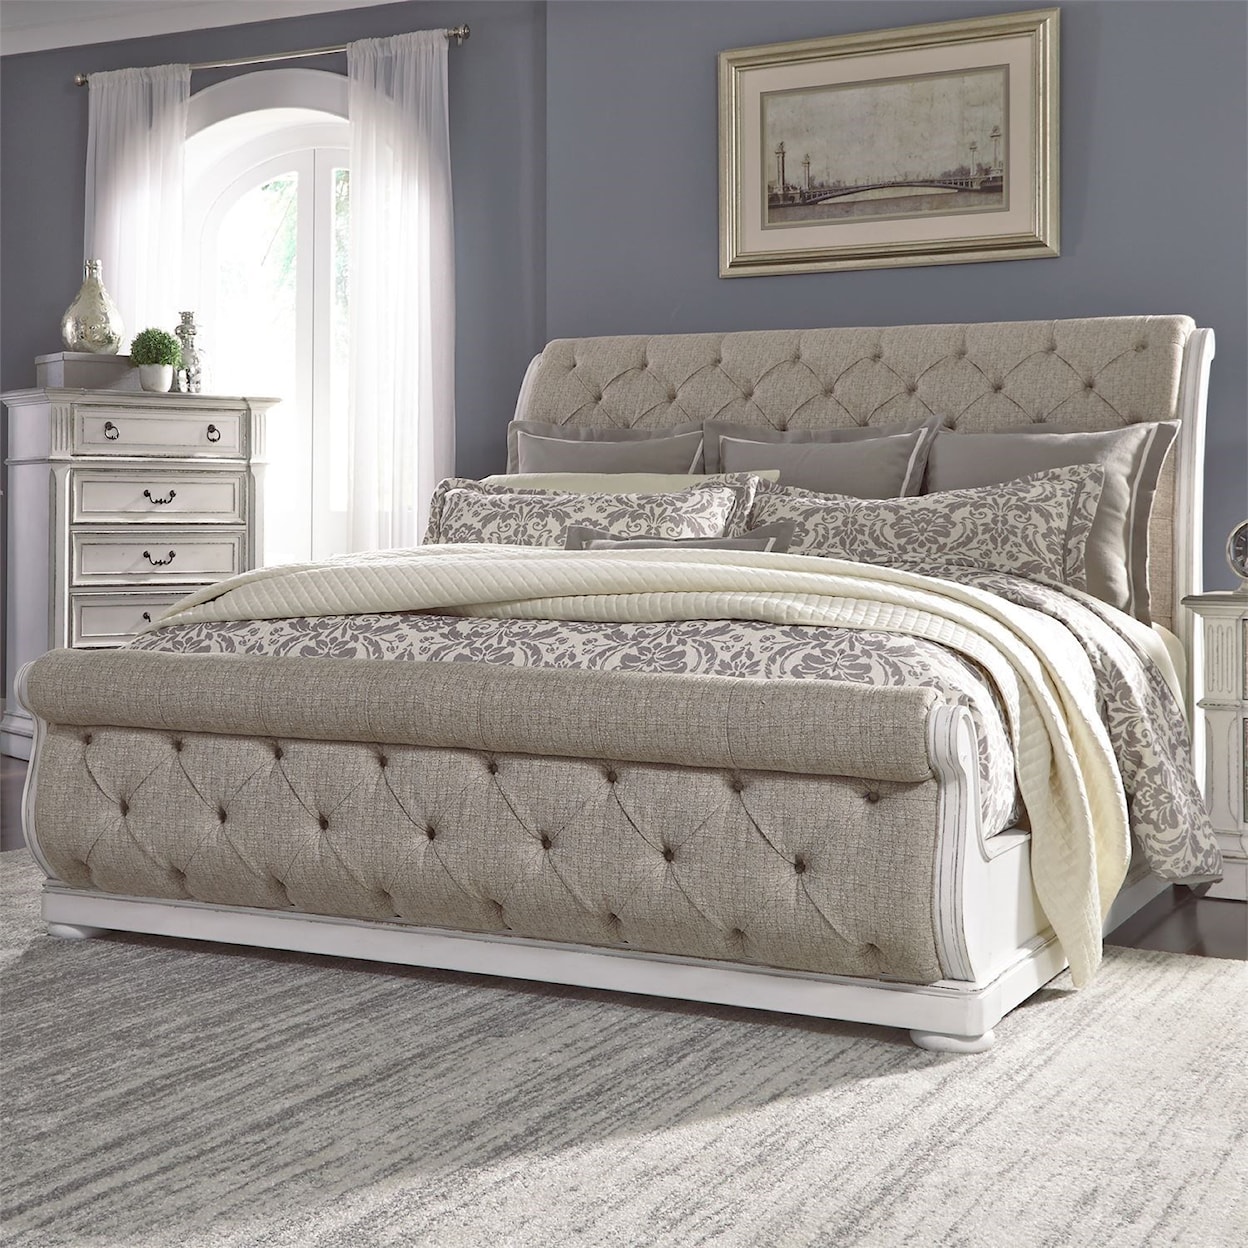 Libby Morgan Queen Upholstered Sleigh Bed